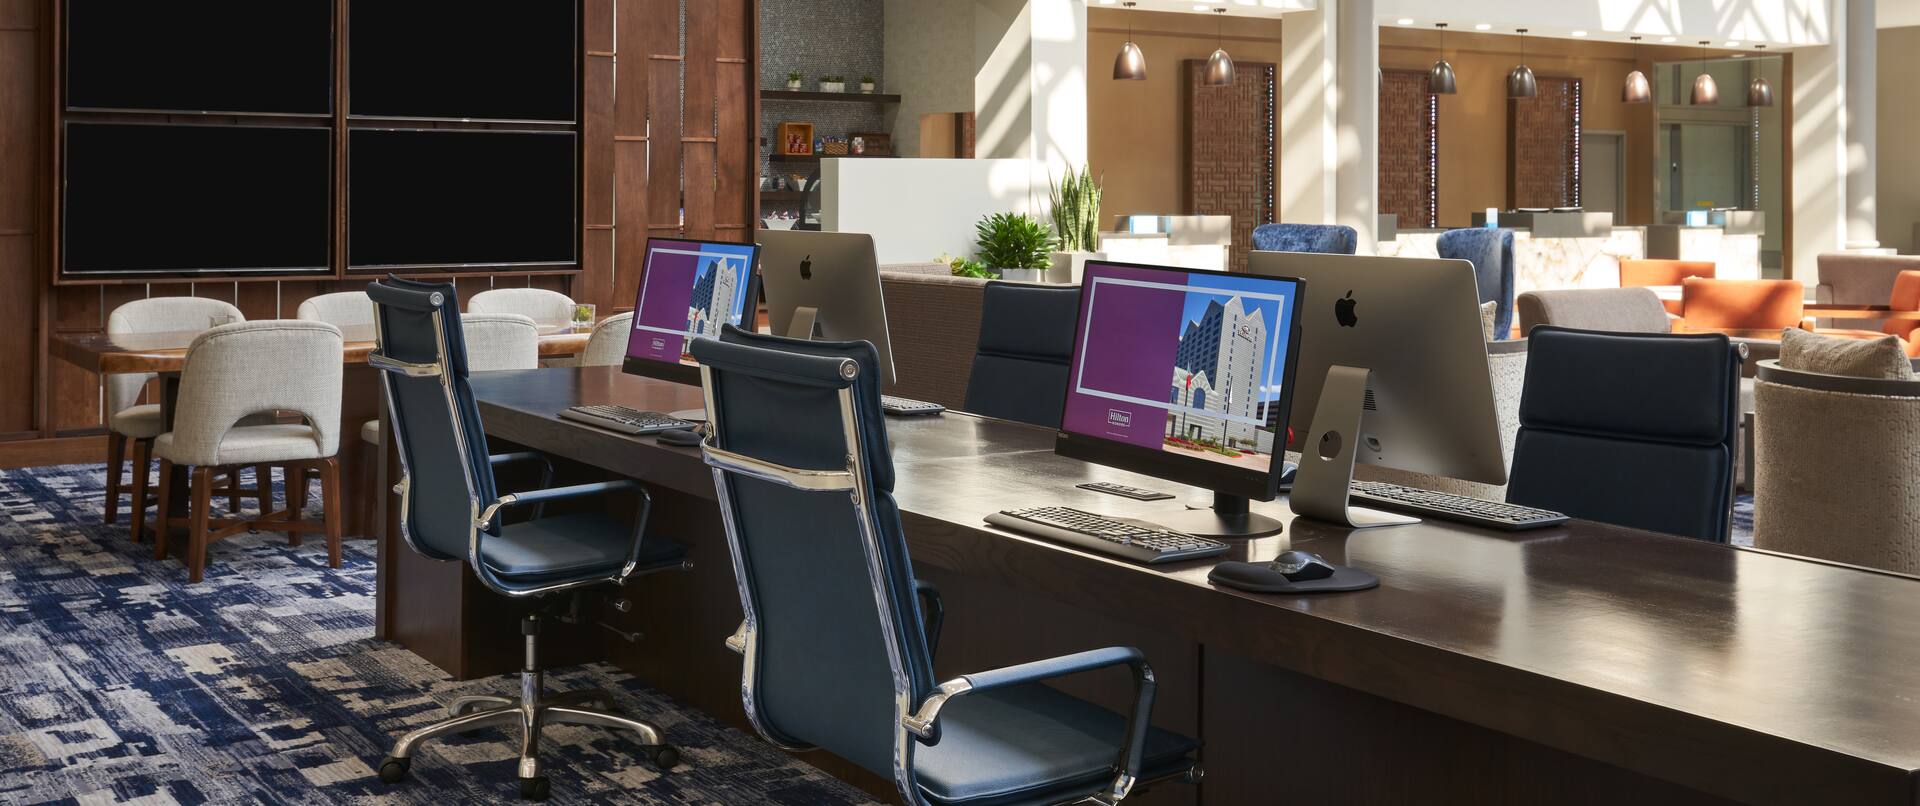 Business center with computers